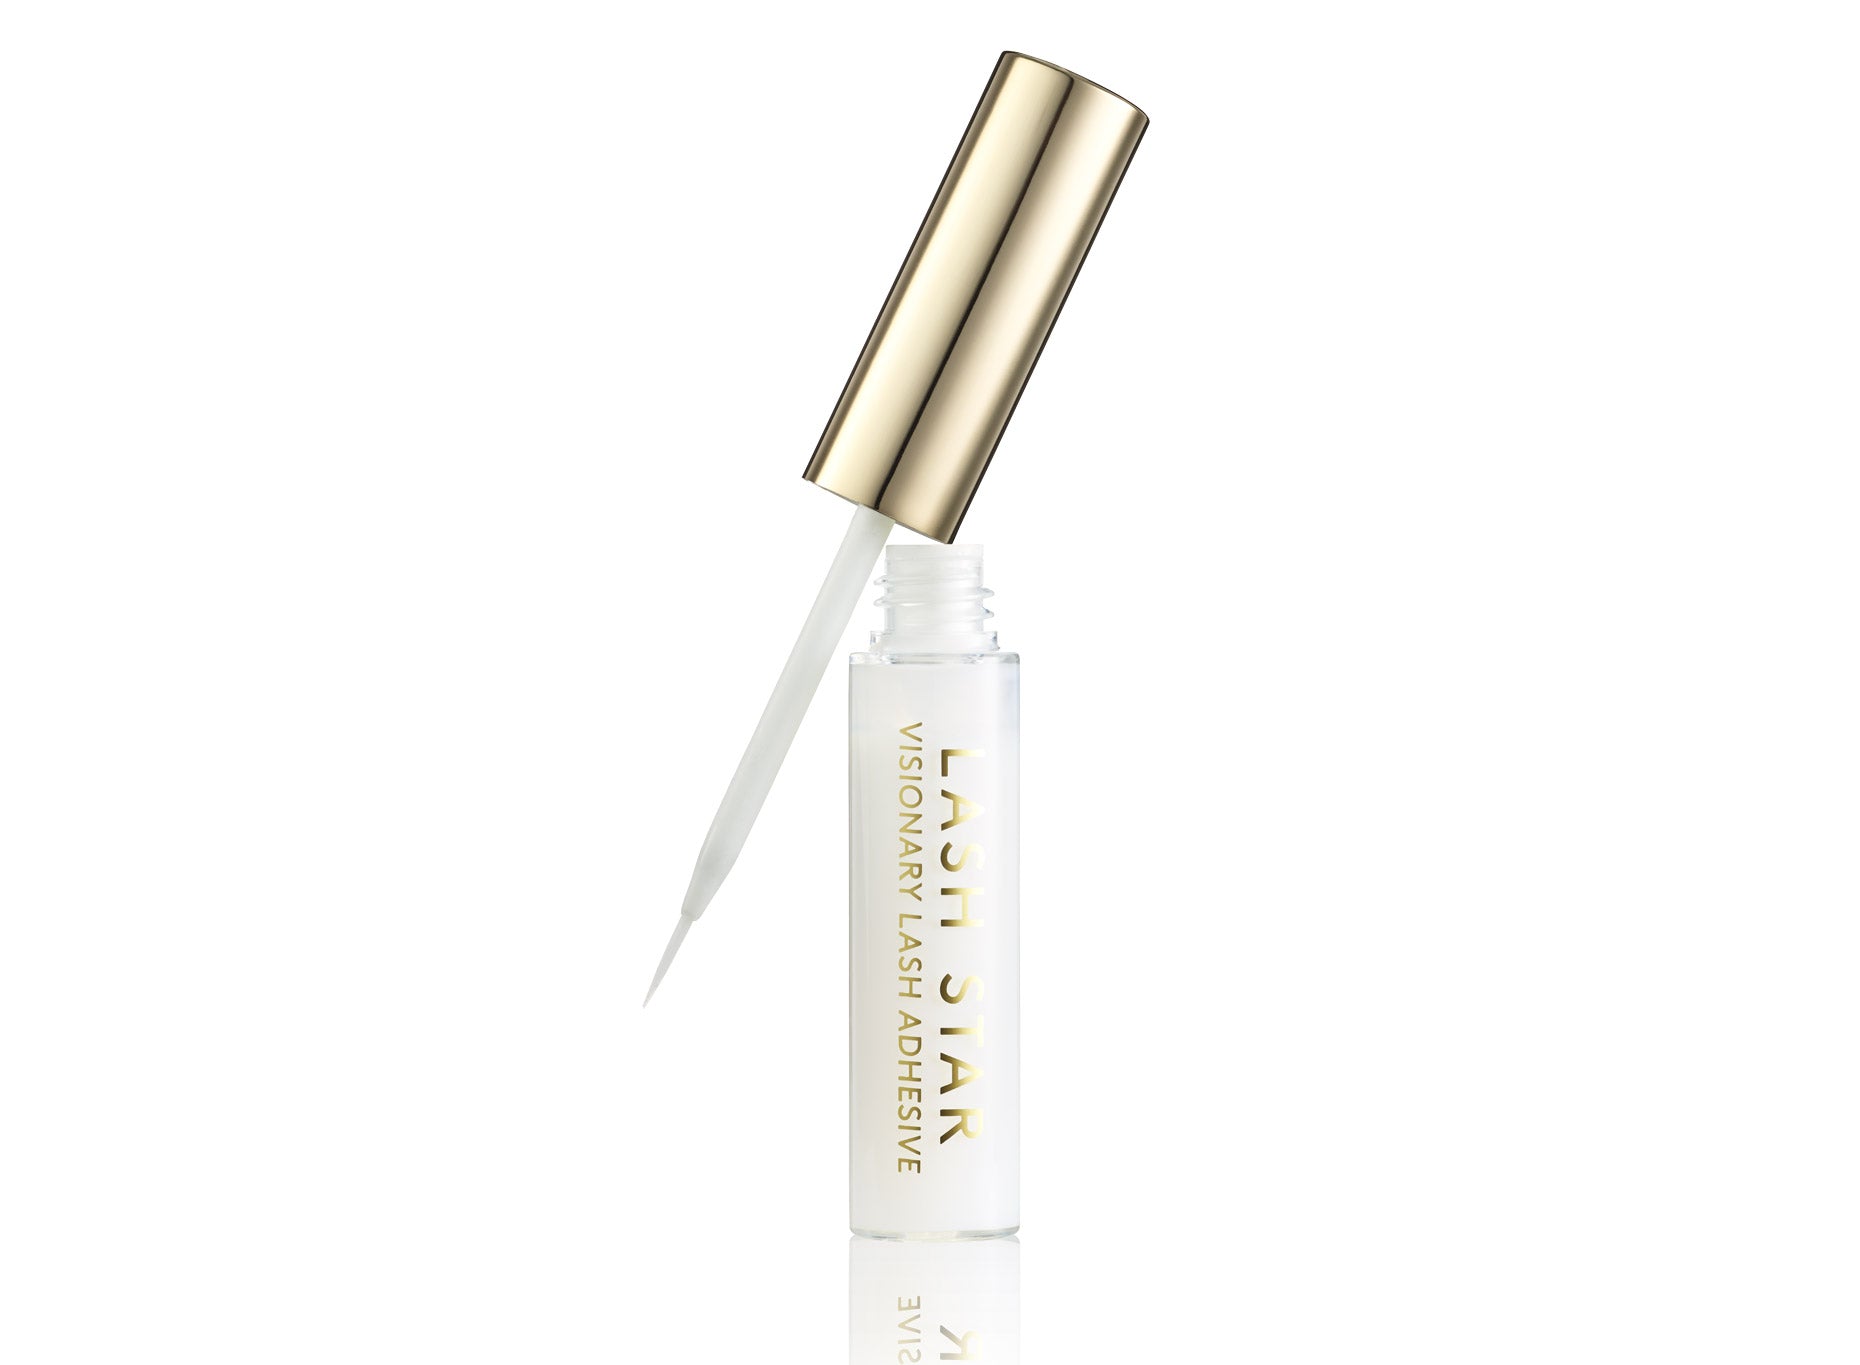 featured-image latex free lash glue from lash star beauty